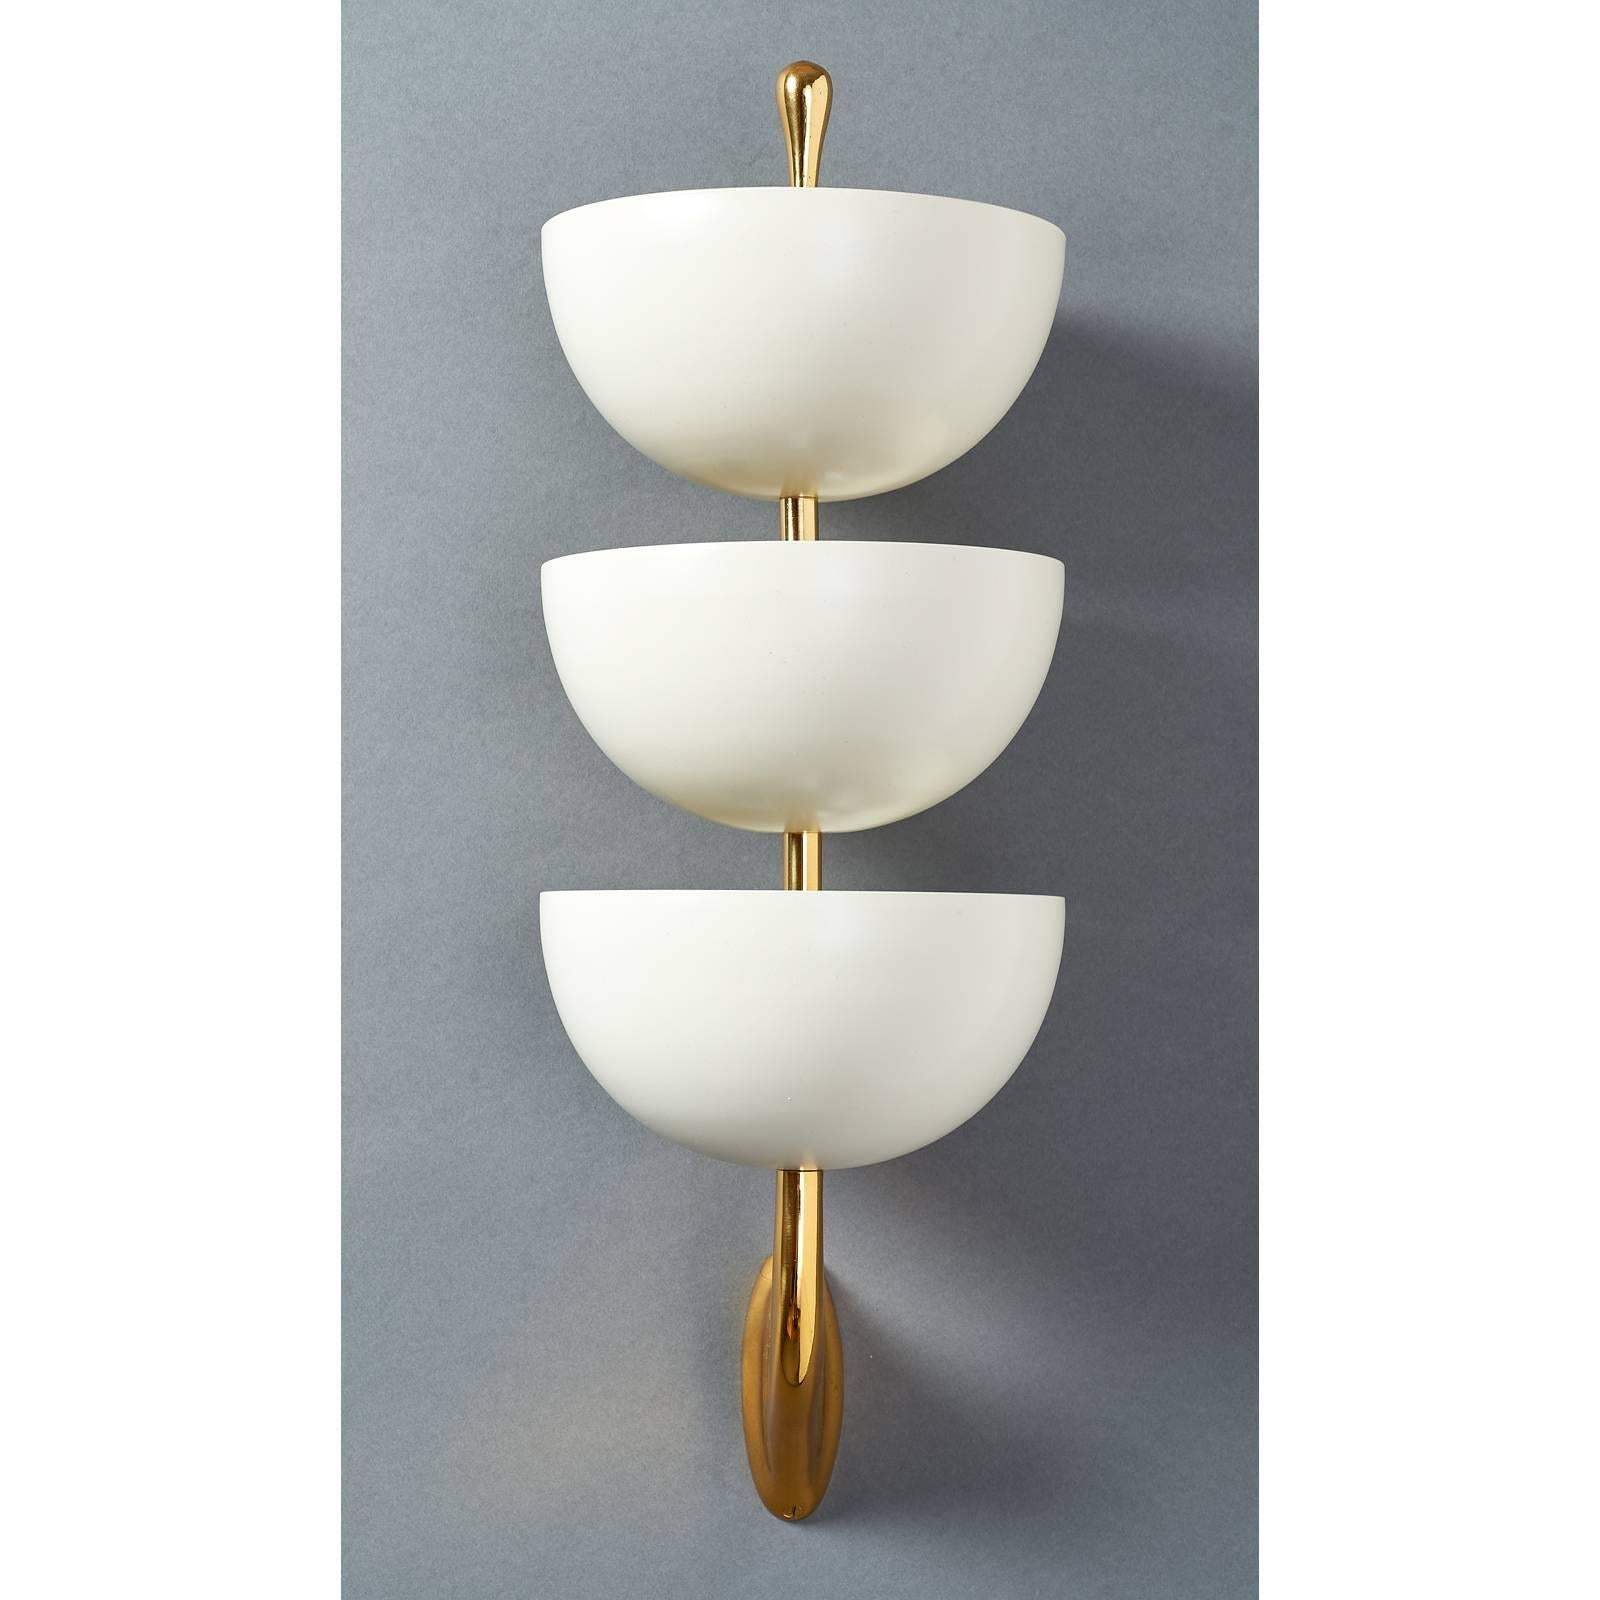 Italian Pair of Three-Tiered Enameled Metal Sconces by Stilnovo, Italy, 1950s